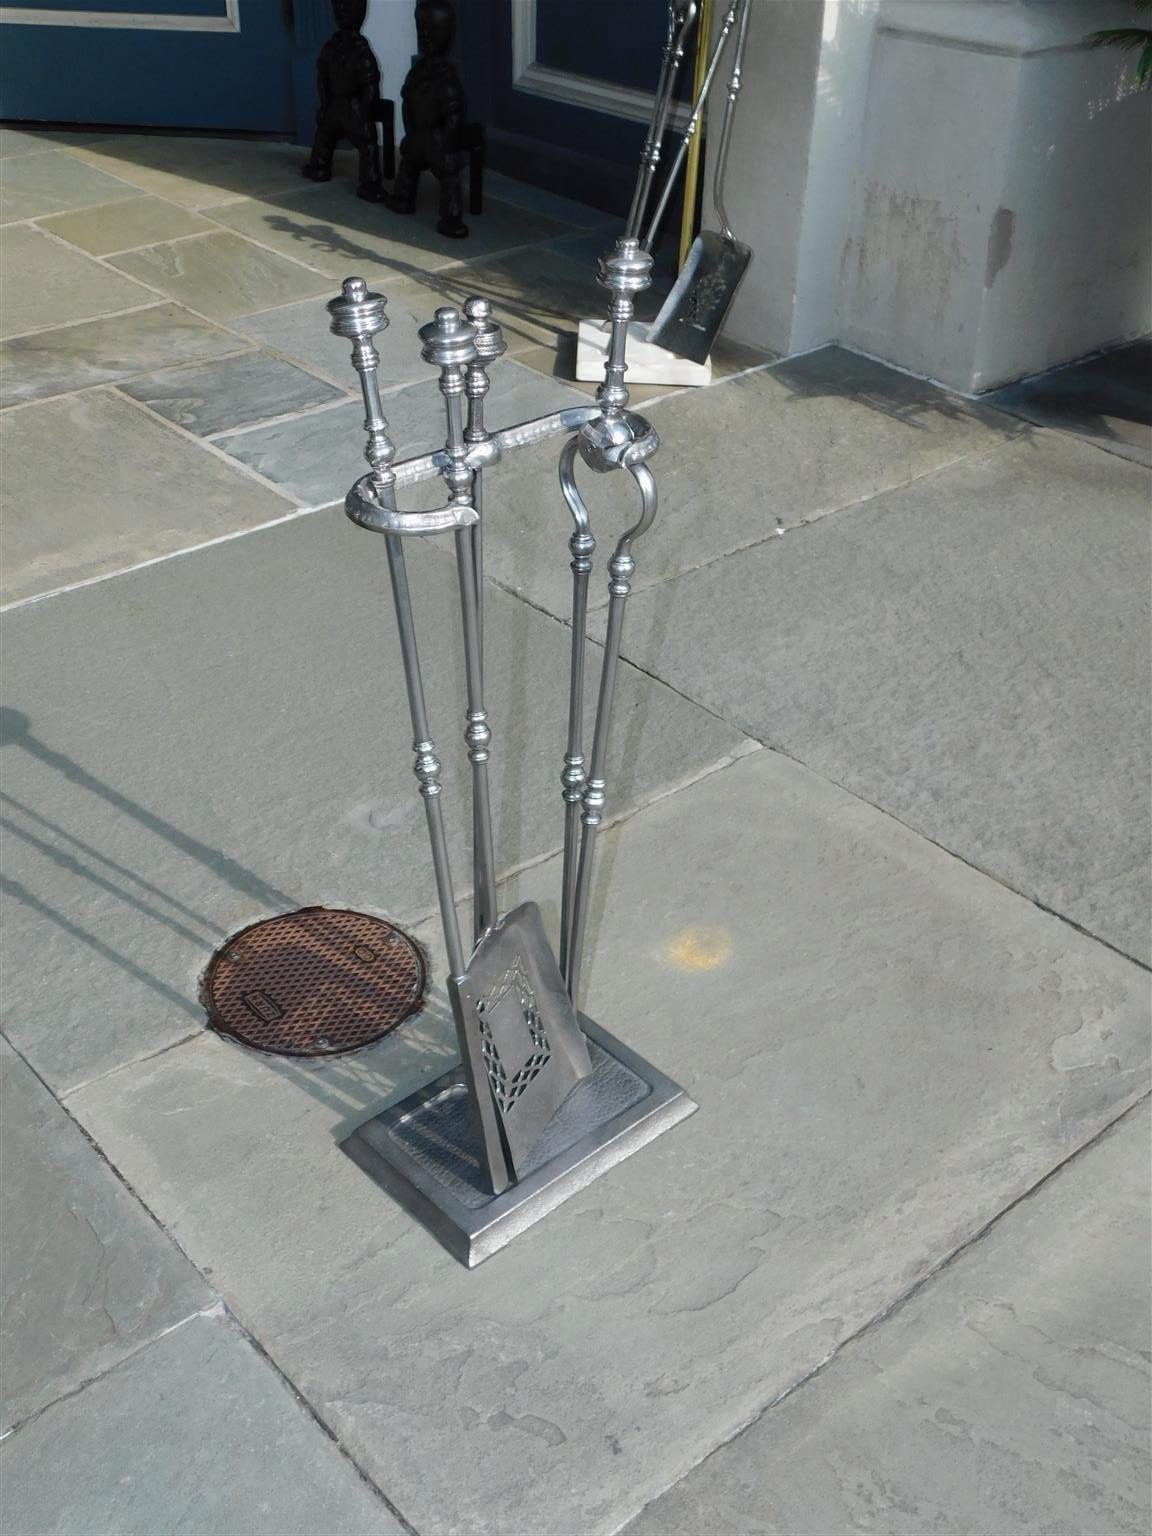 Set of English polished steel urn finial fire place tools on stand, Mid 19th century Set consist of tong, pierced shovel, and poker.